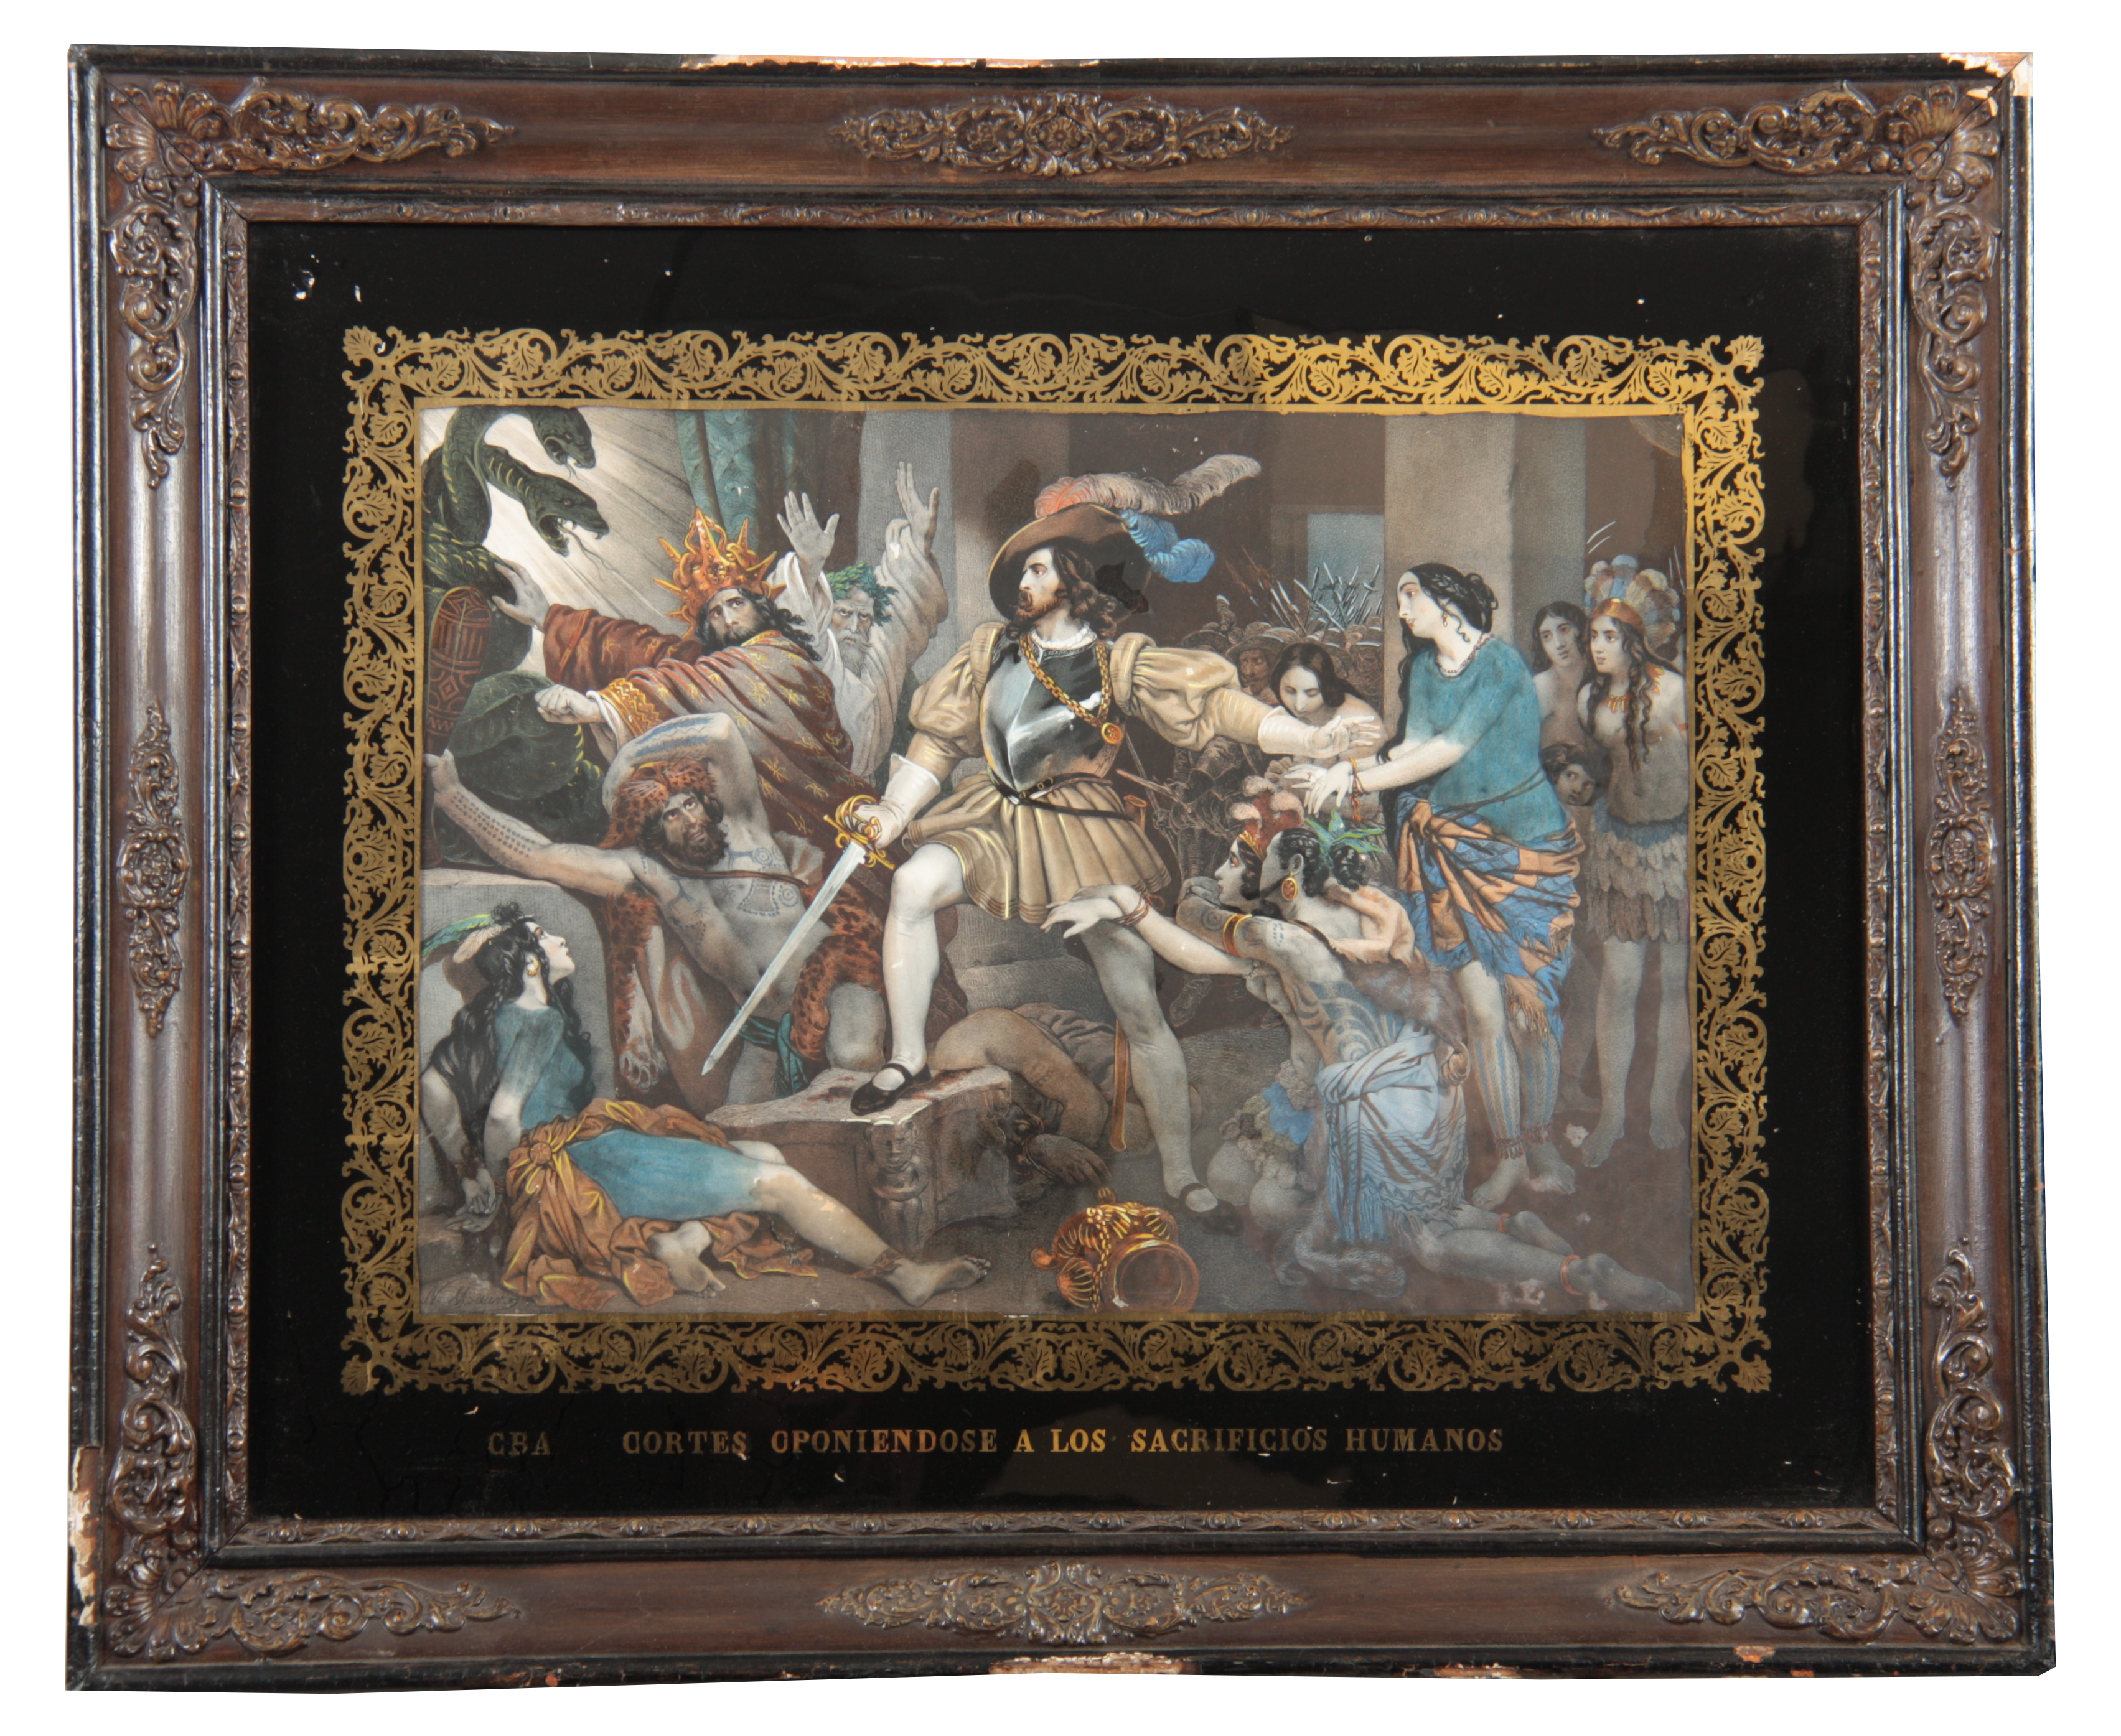 19TH CENTURY CONTINENTAL COLOURED PRINT. Figures in a sacrificial scene, scrolled gilt and titled